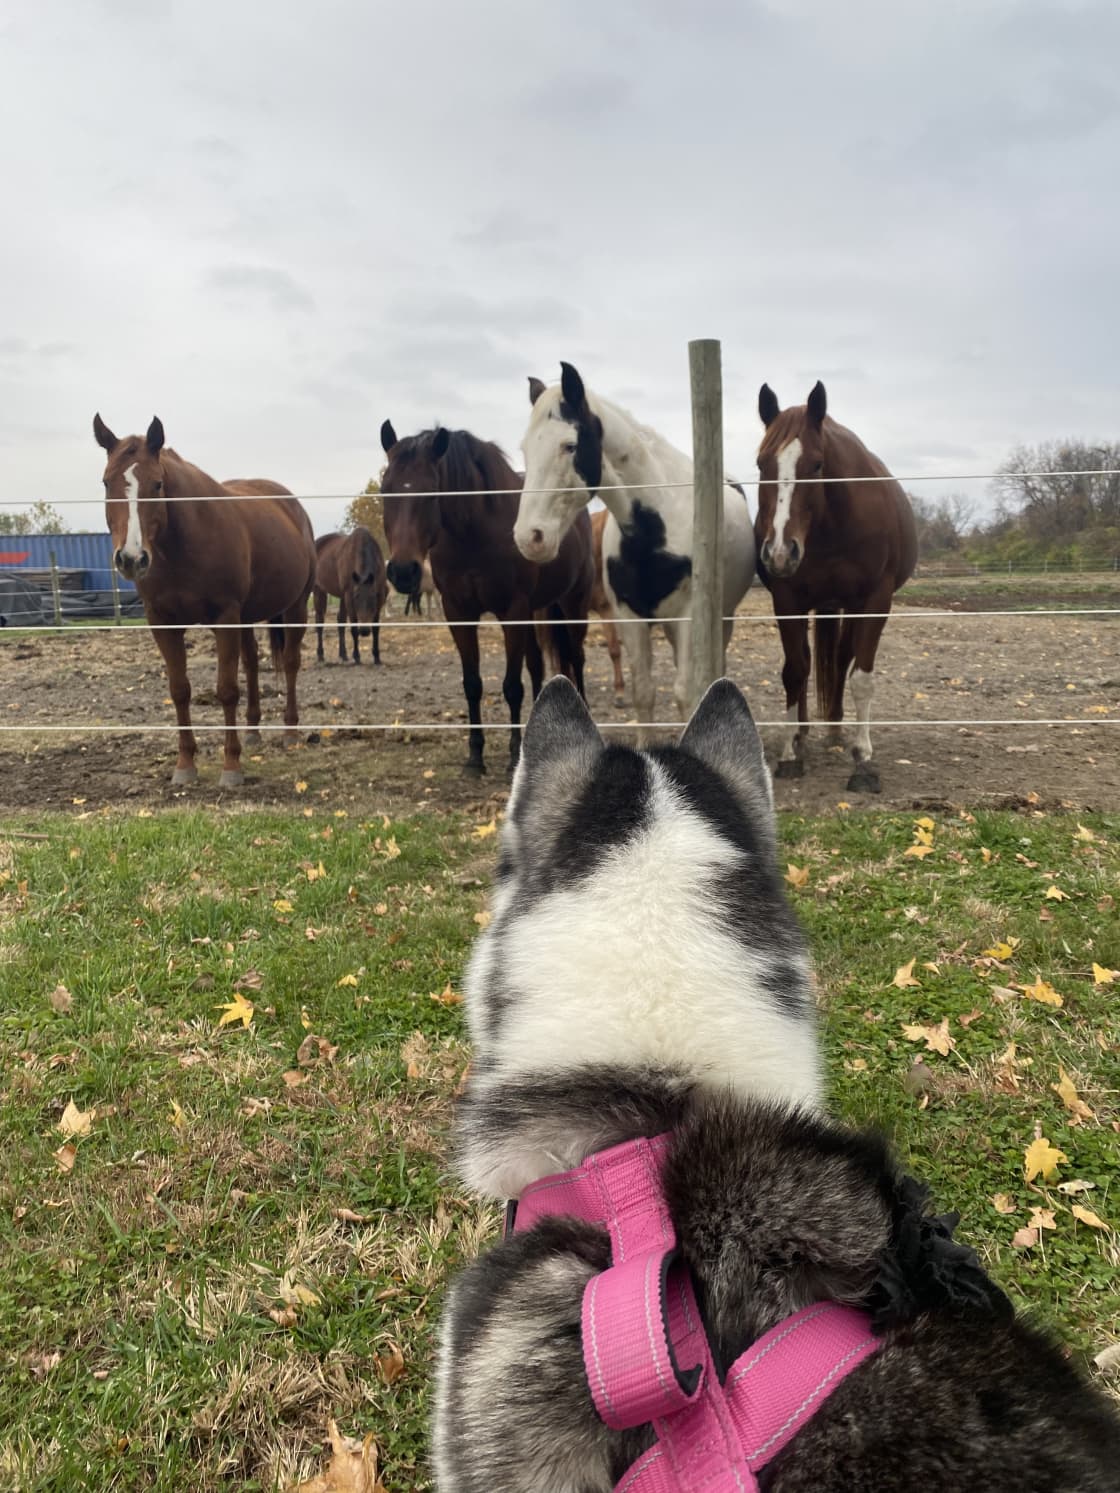 My dog was obsessed with the beautiful horses